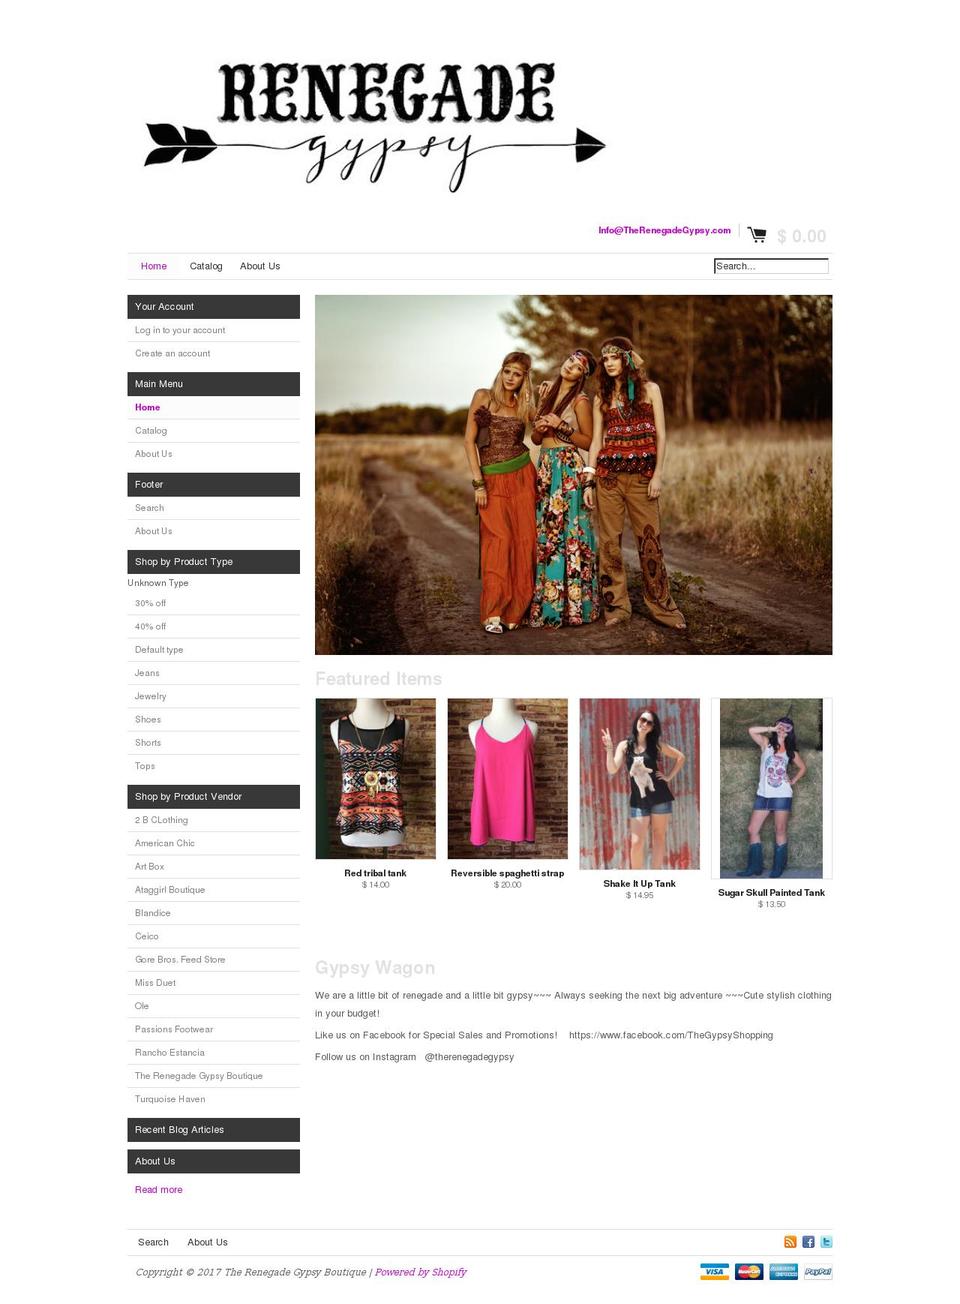 Expo Shopify theme site example therenegadegypsy.com